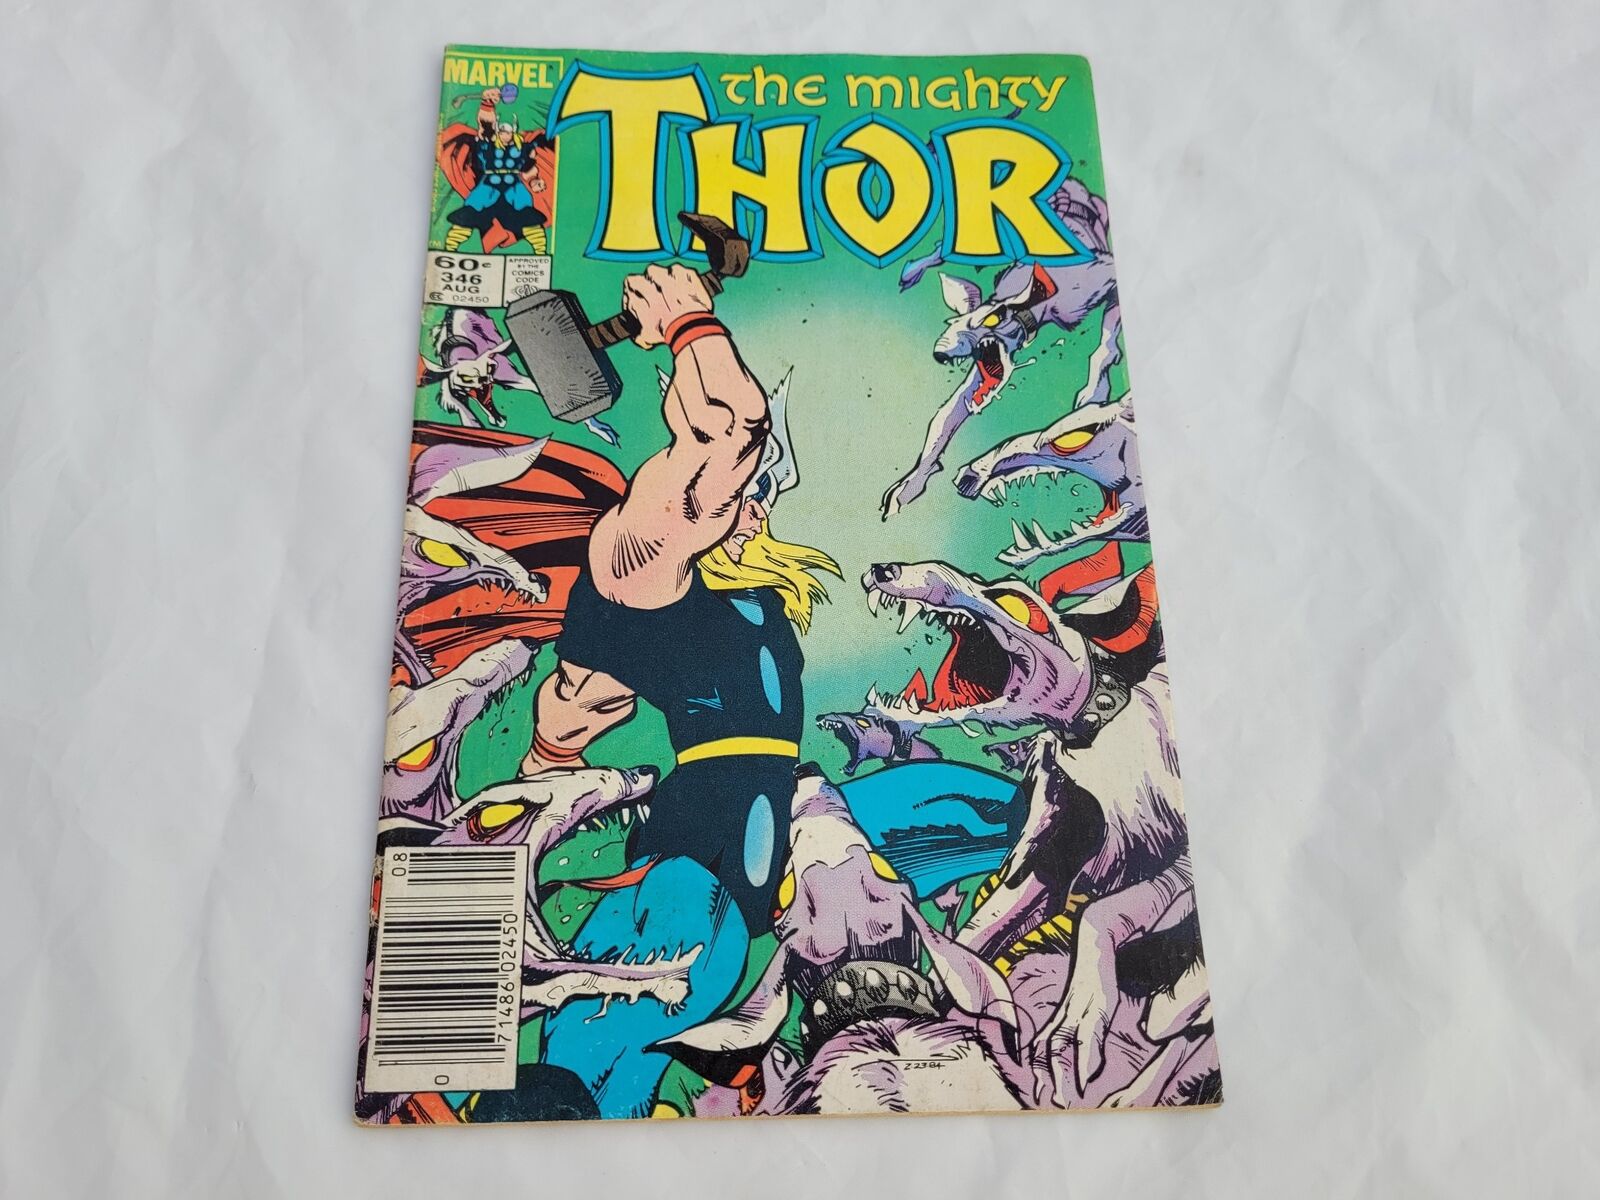 Marvel The Mighty Thor Number 346 Aug Hot Comic Book